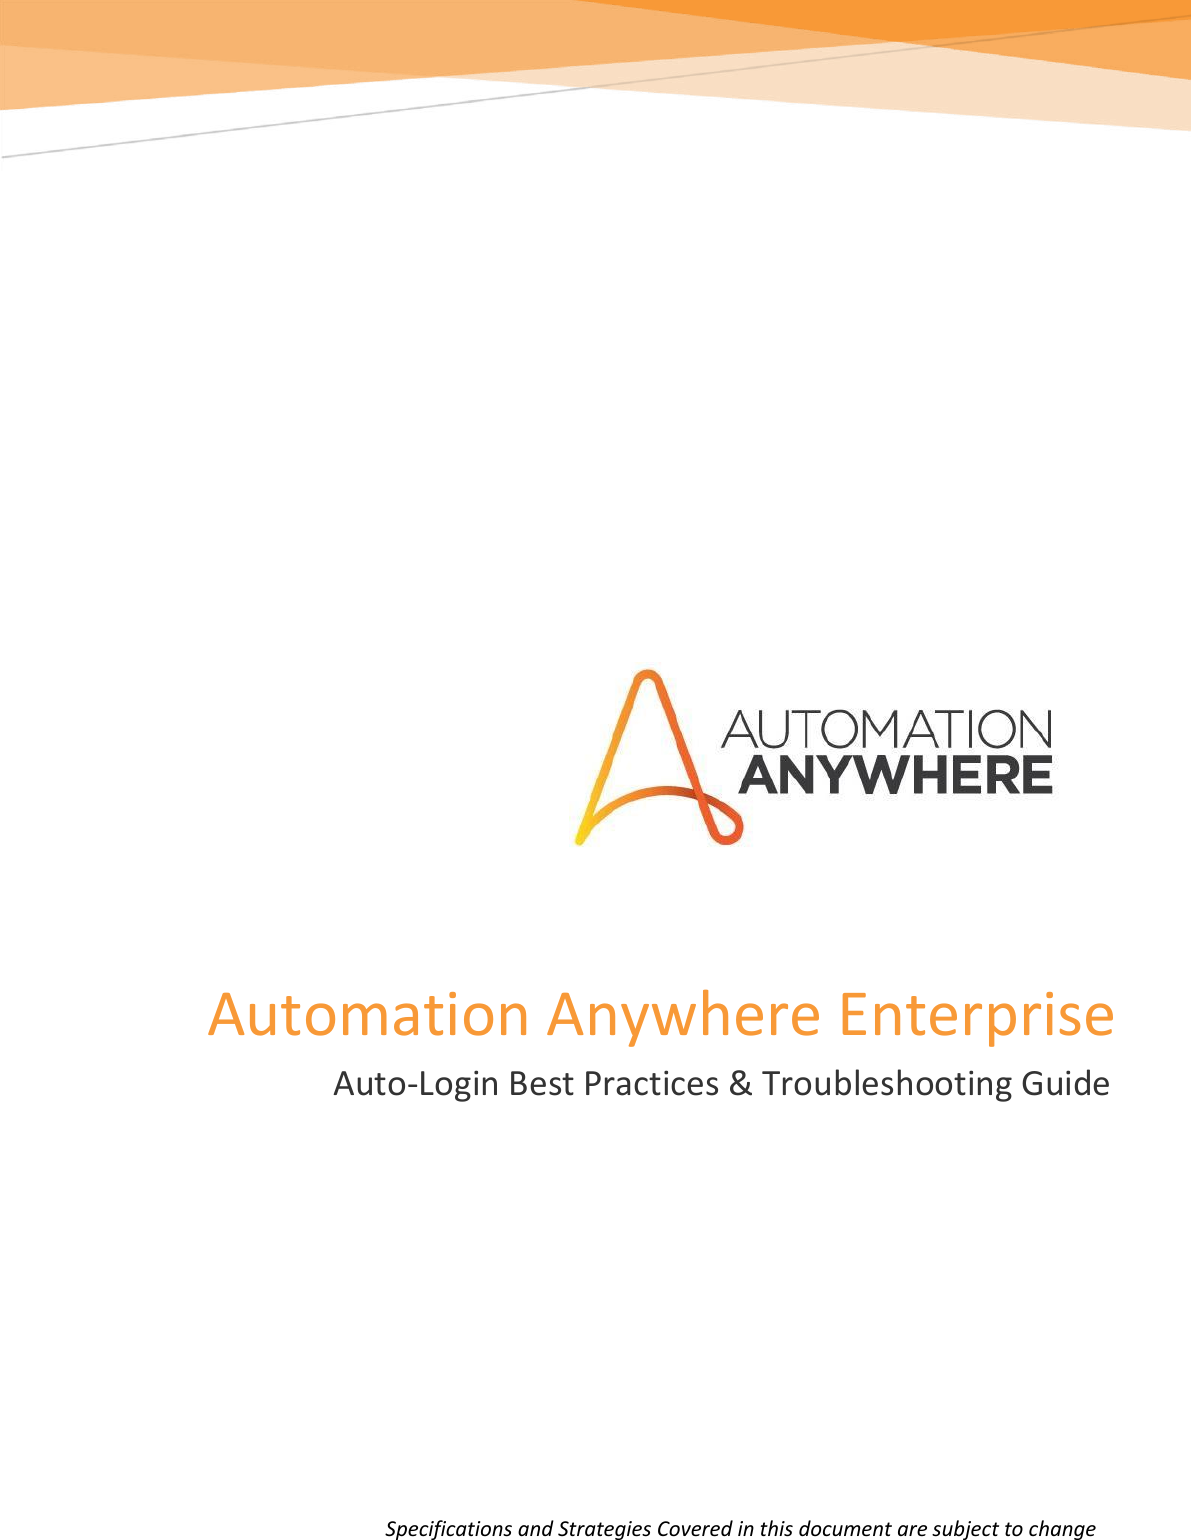 Page 1 of 11 - AAE Auto Login Best Practice Troubleshooting Guide[1]